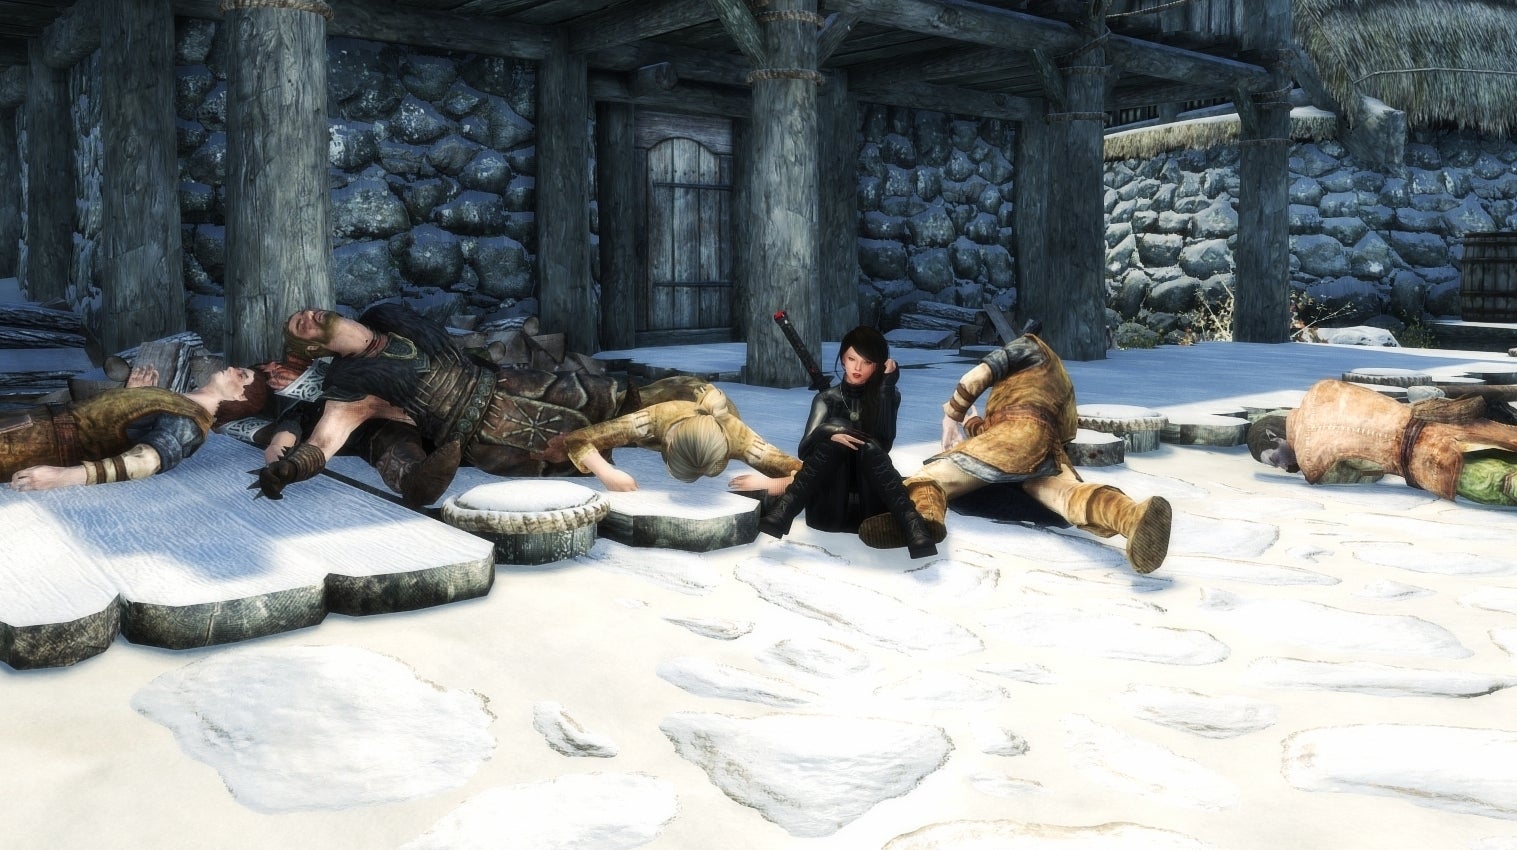 Image for "I am alone." Skyrim player tries to kill everyone in the game